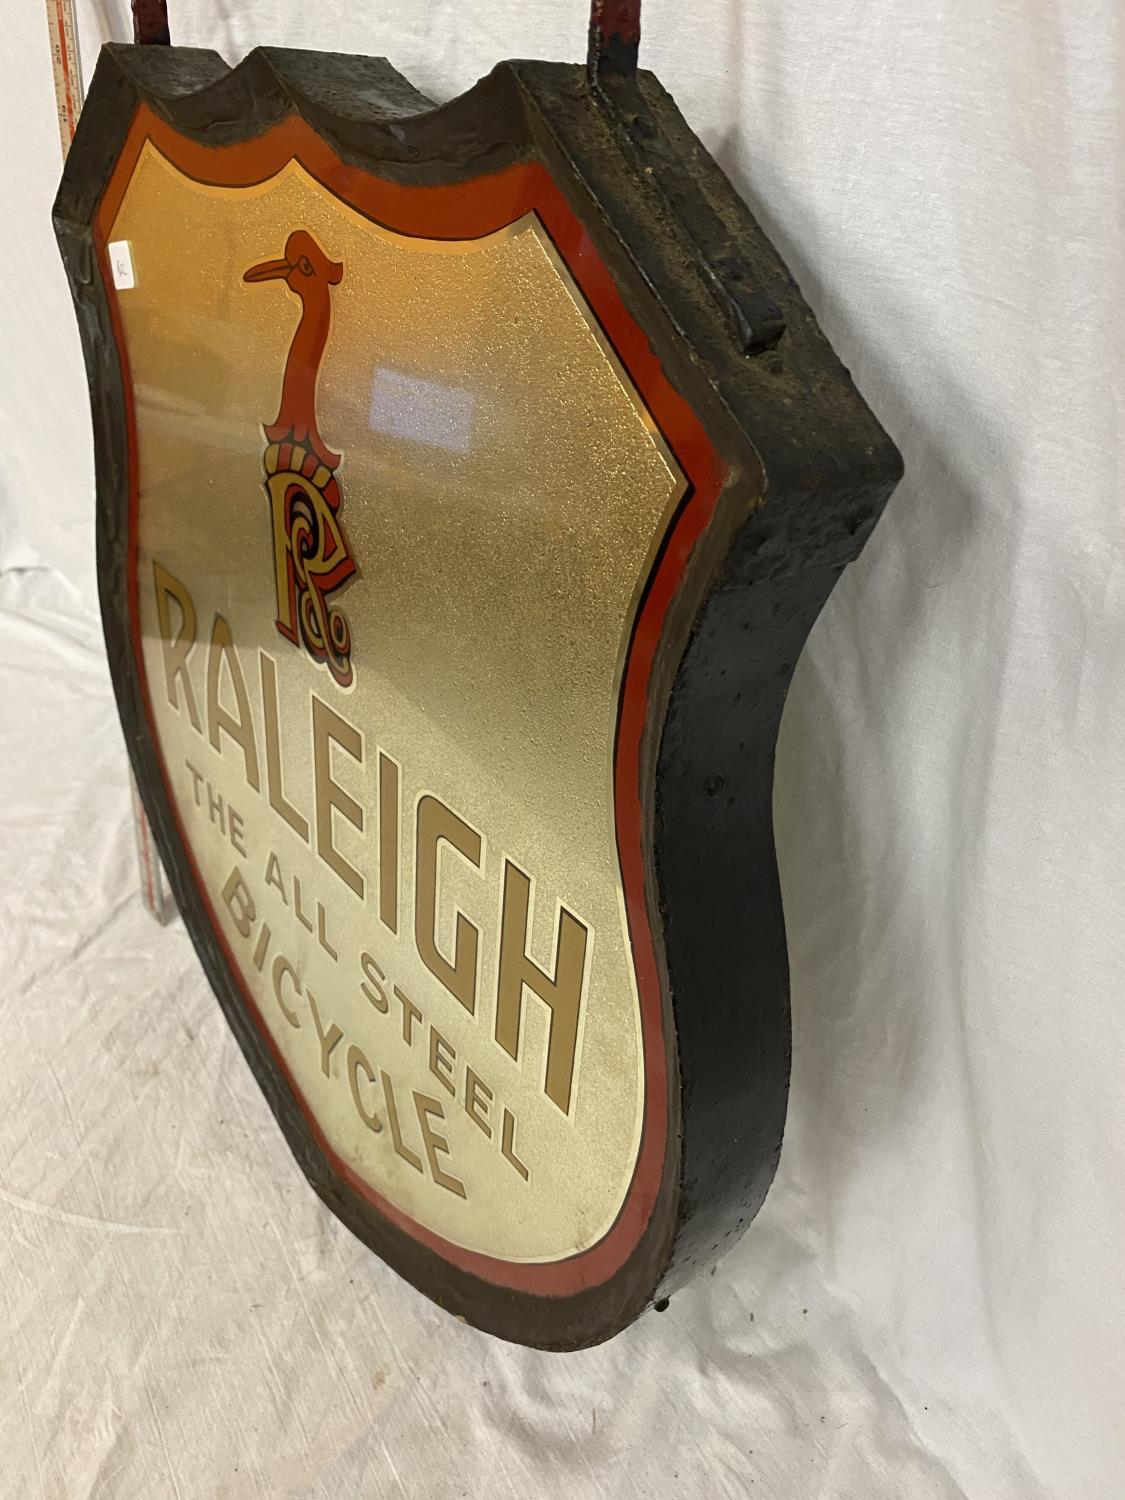 A VINTAGE GLASS AND MIRRORED "RALEIGH, THE ALL STEEL BICYCLE" DOUBLE SIDED ADVERTISING SIGN IN RED - Image 2 of 5